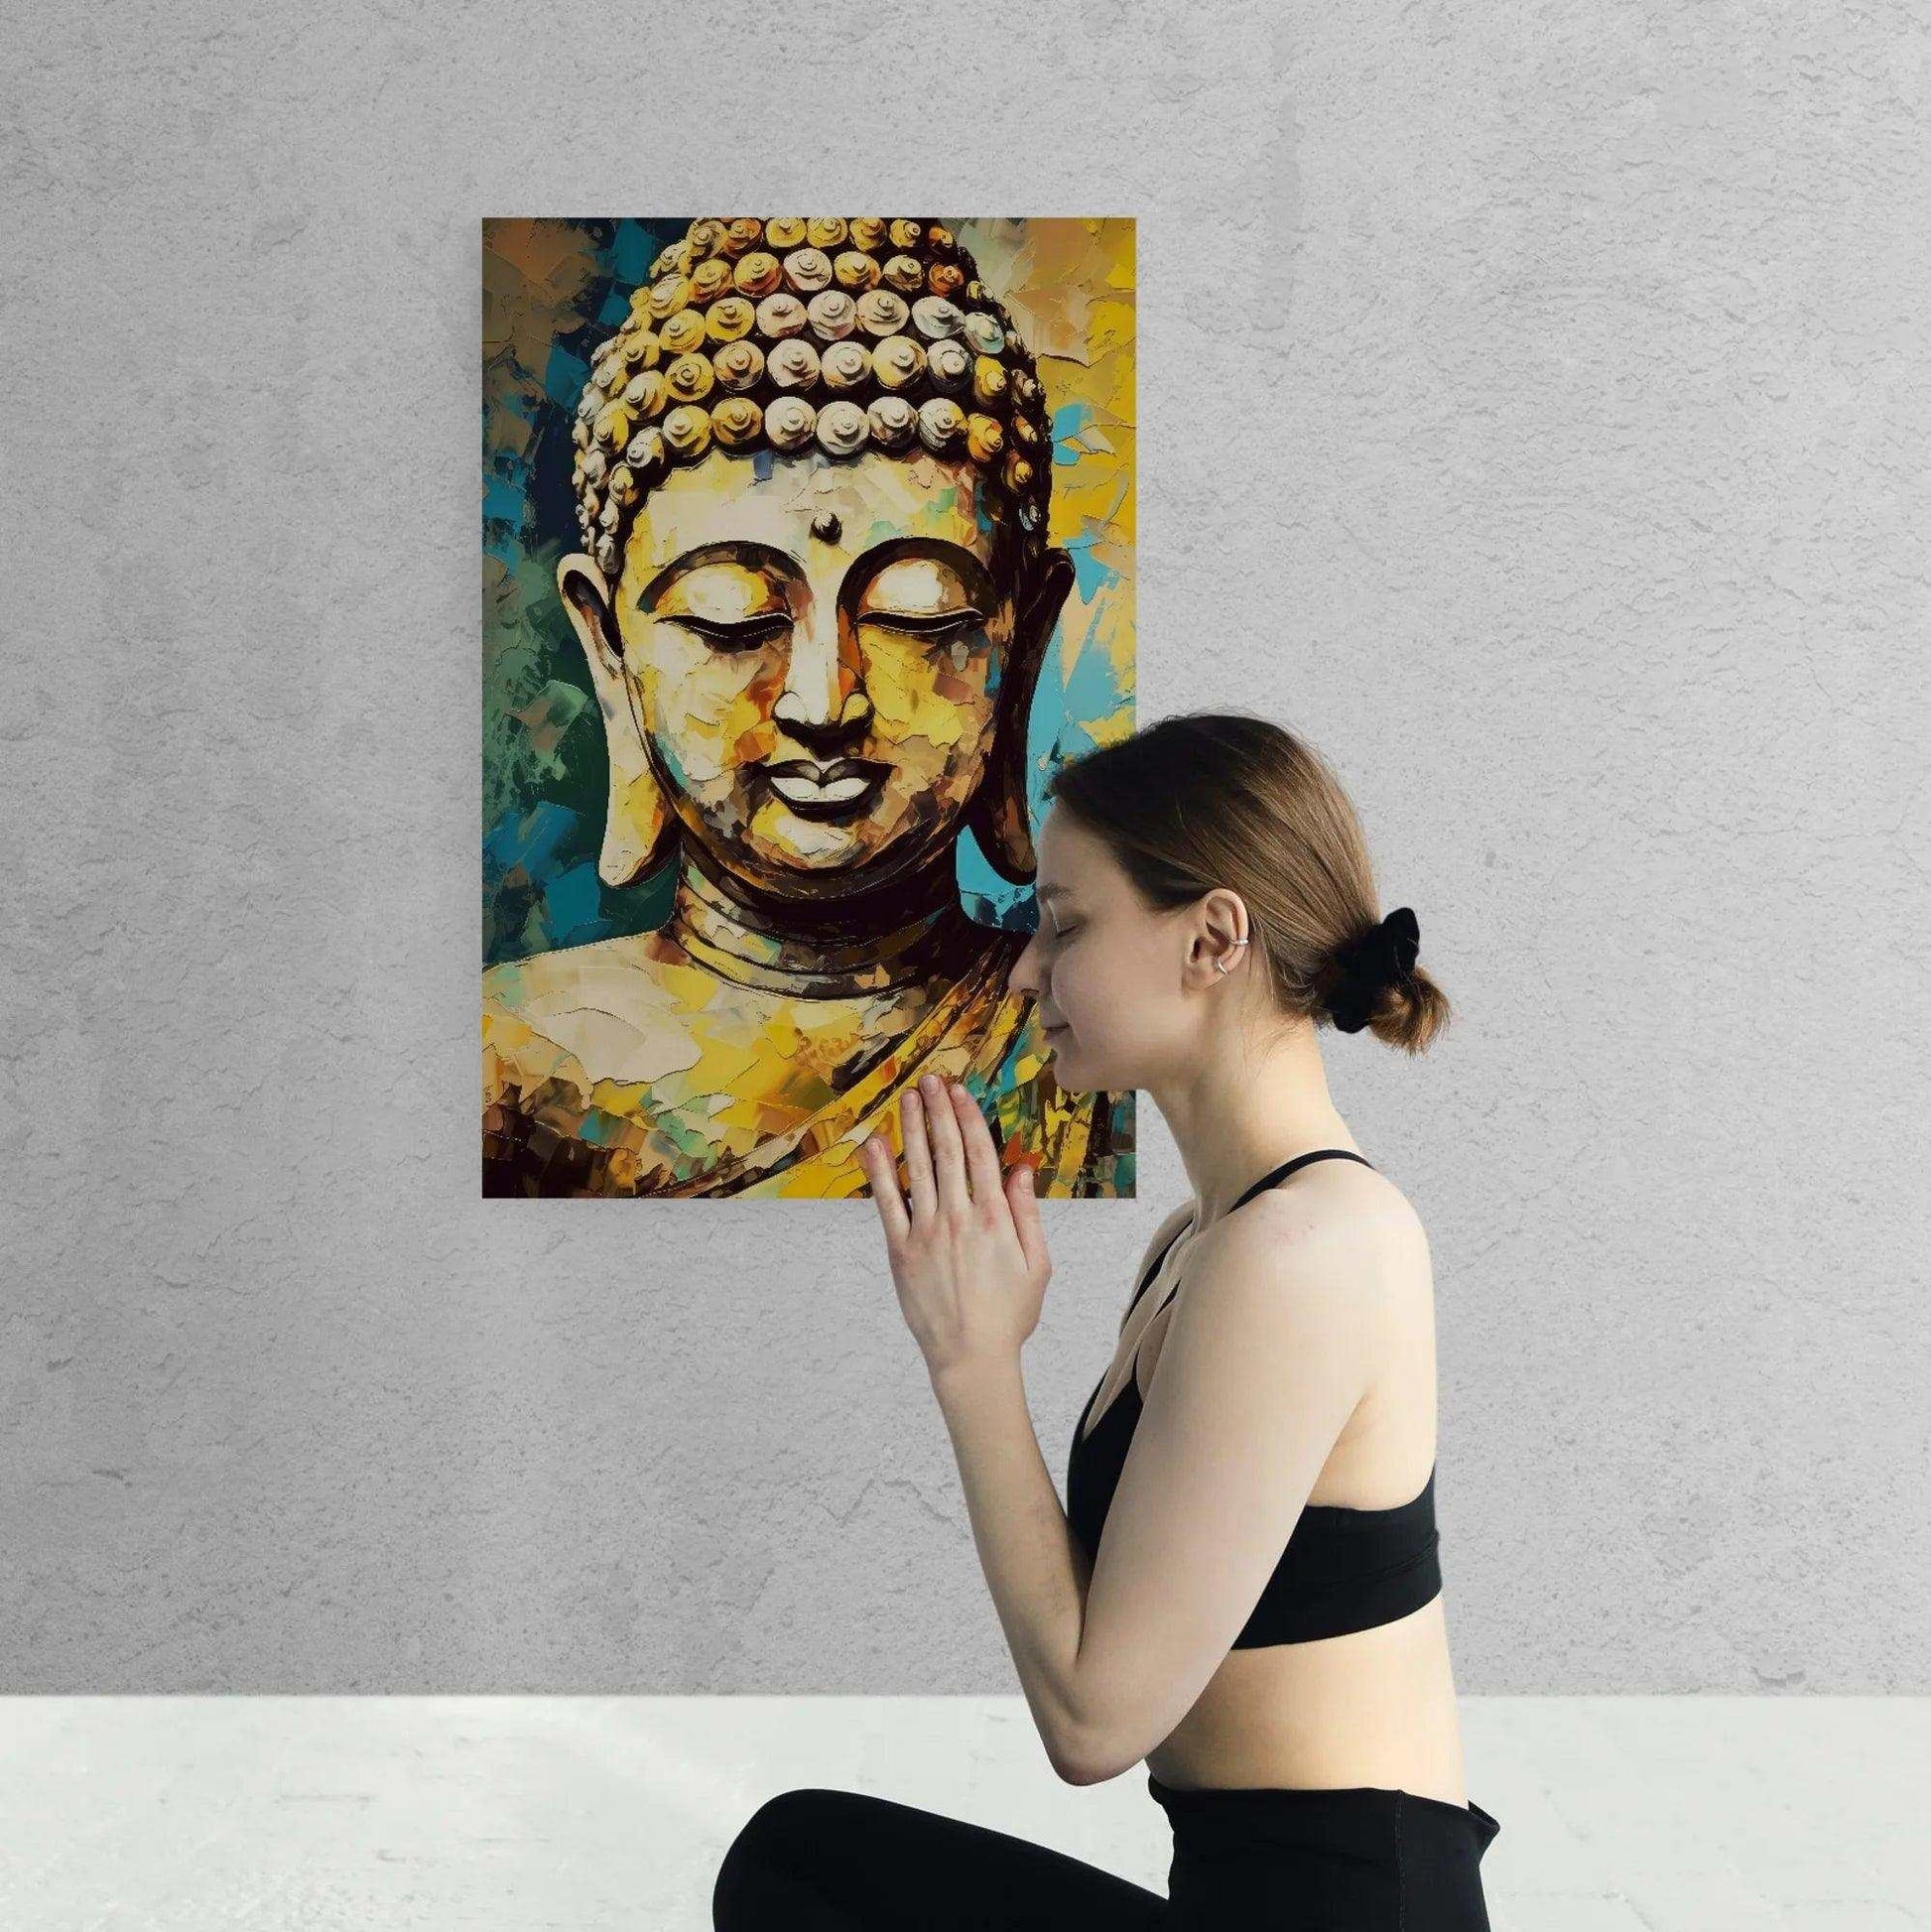 Woman in a black top kneeling and practicing mindfulness in front of a colorful abstract Buddha poster with rich yellow, gold, and teal tones on a textured white wall.